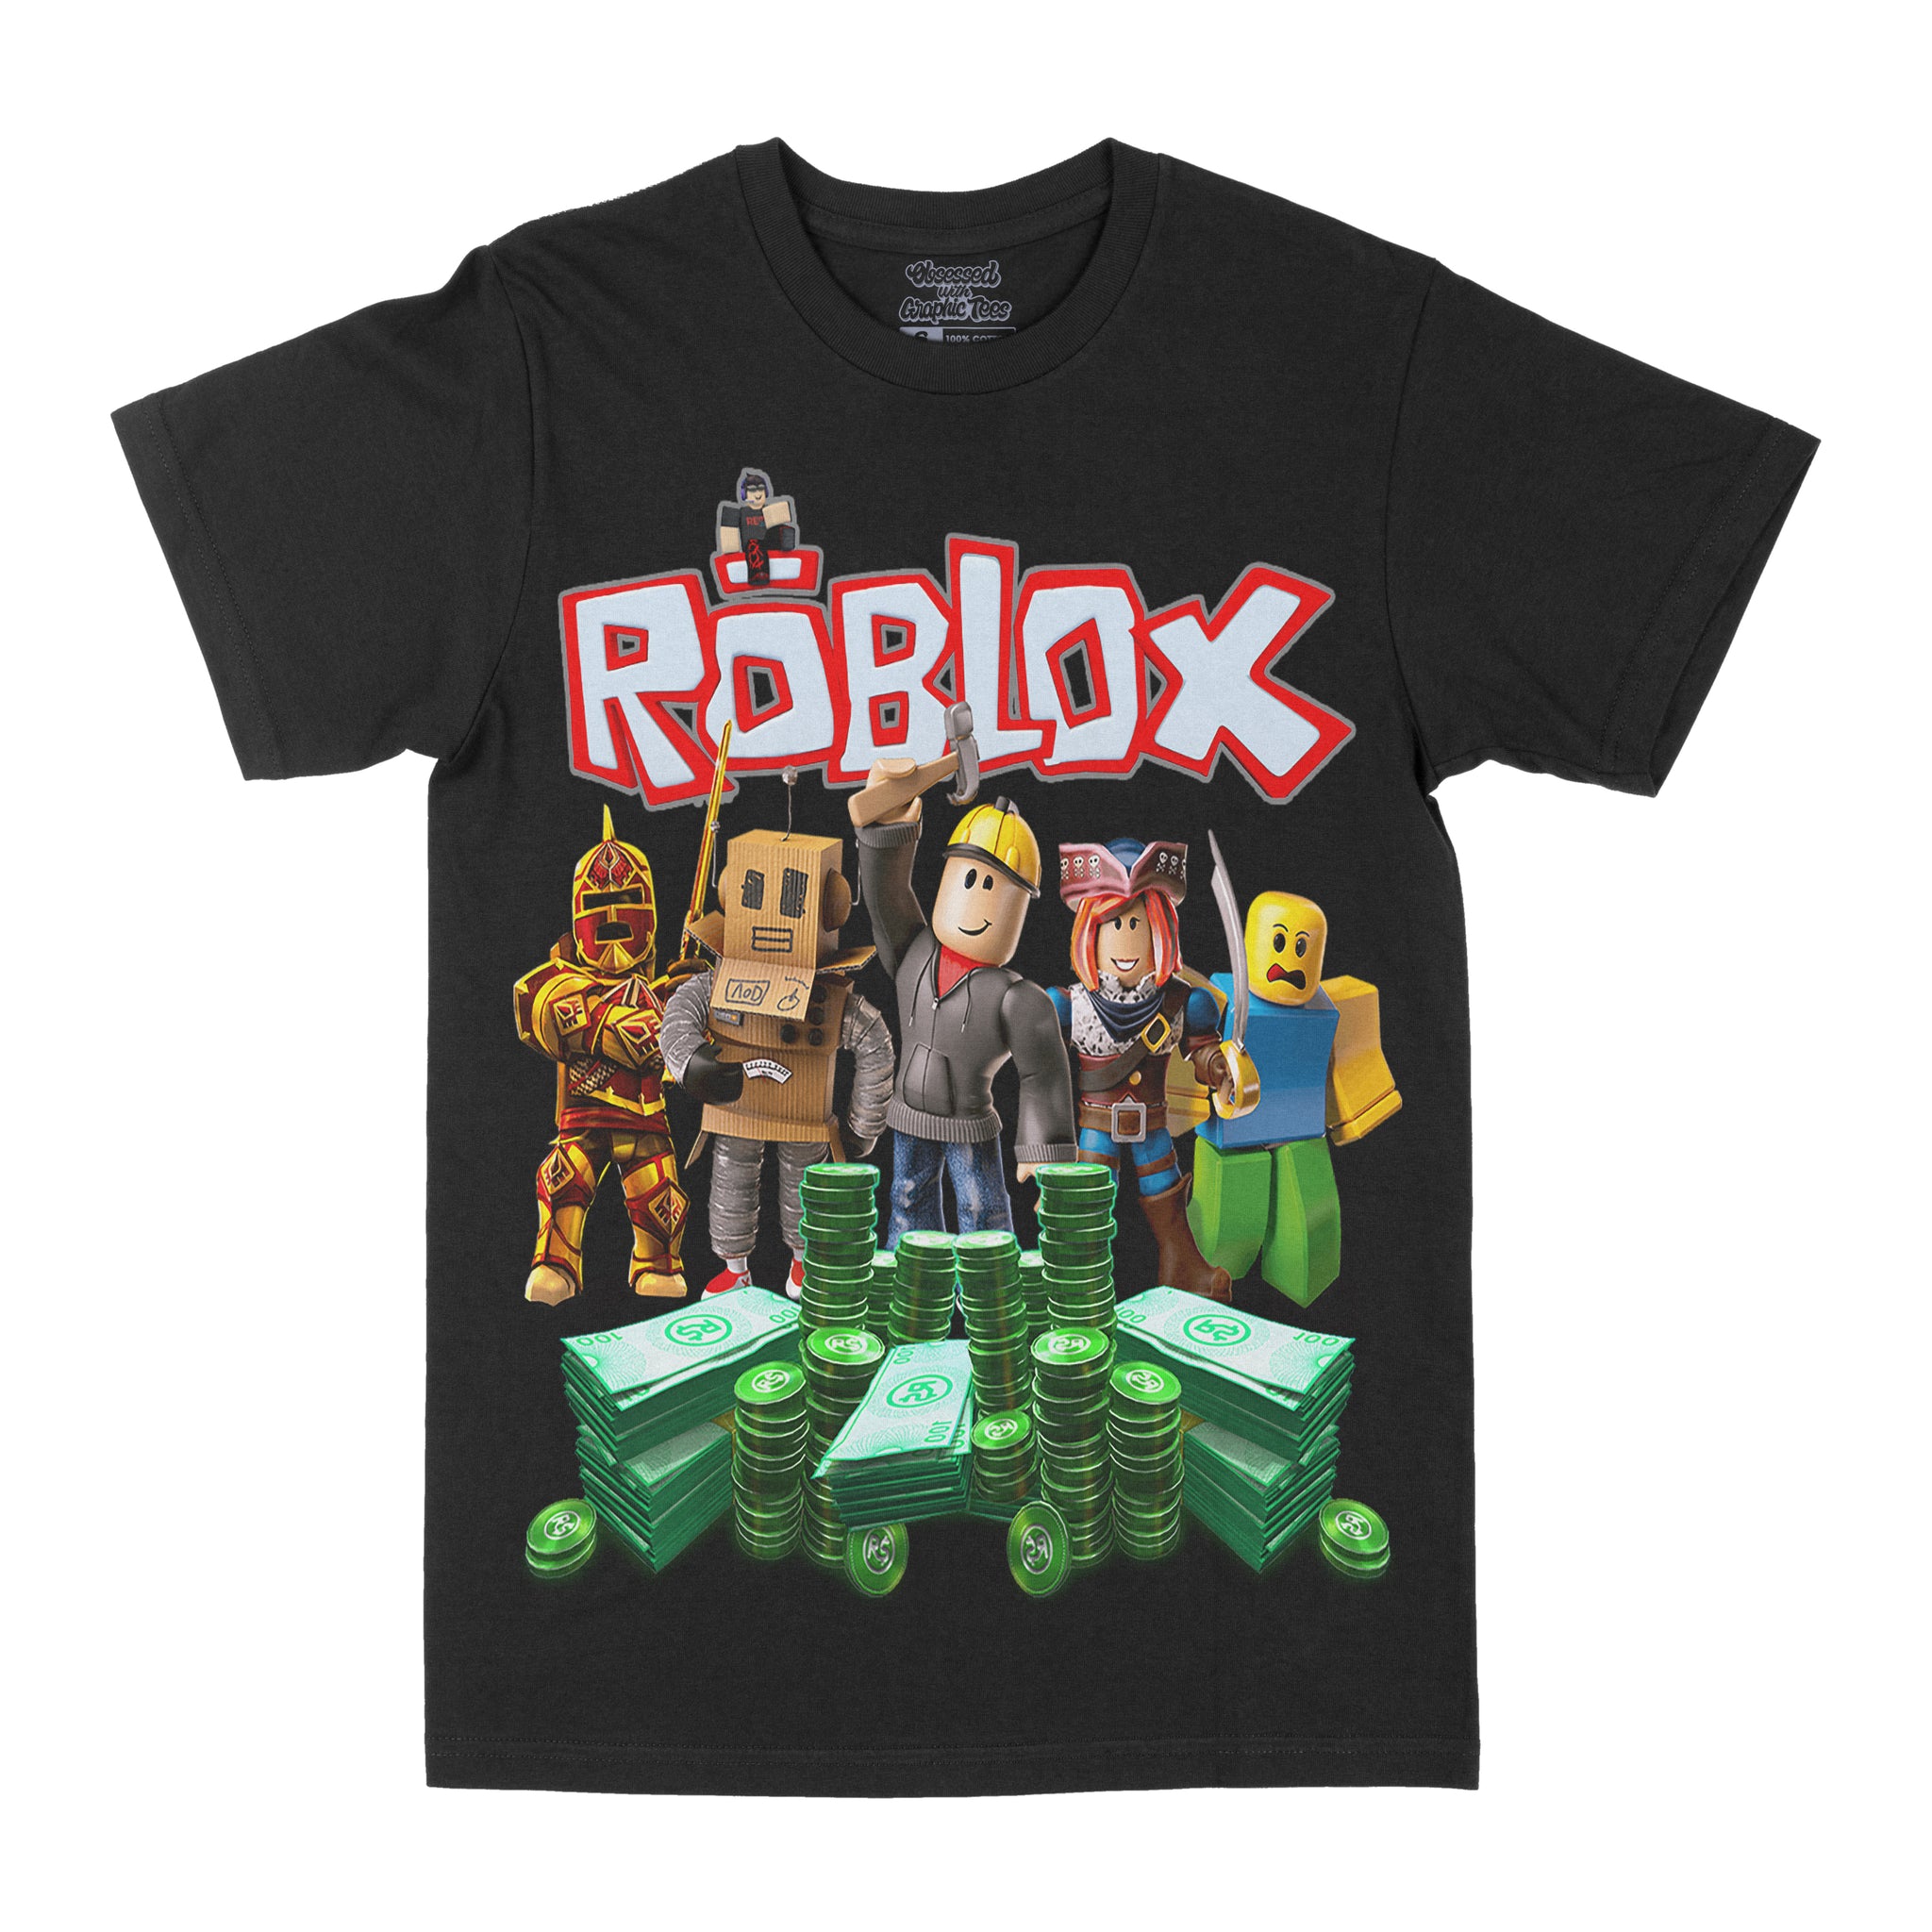 Roblox Graphic Tee